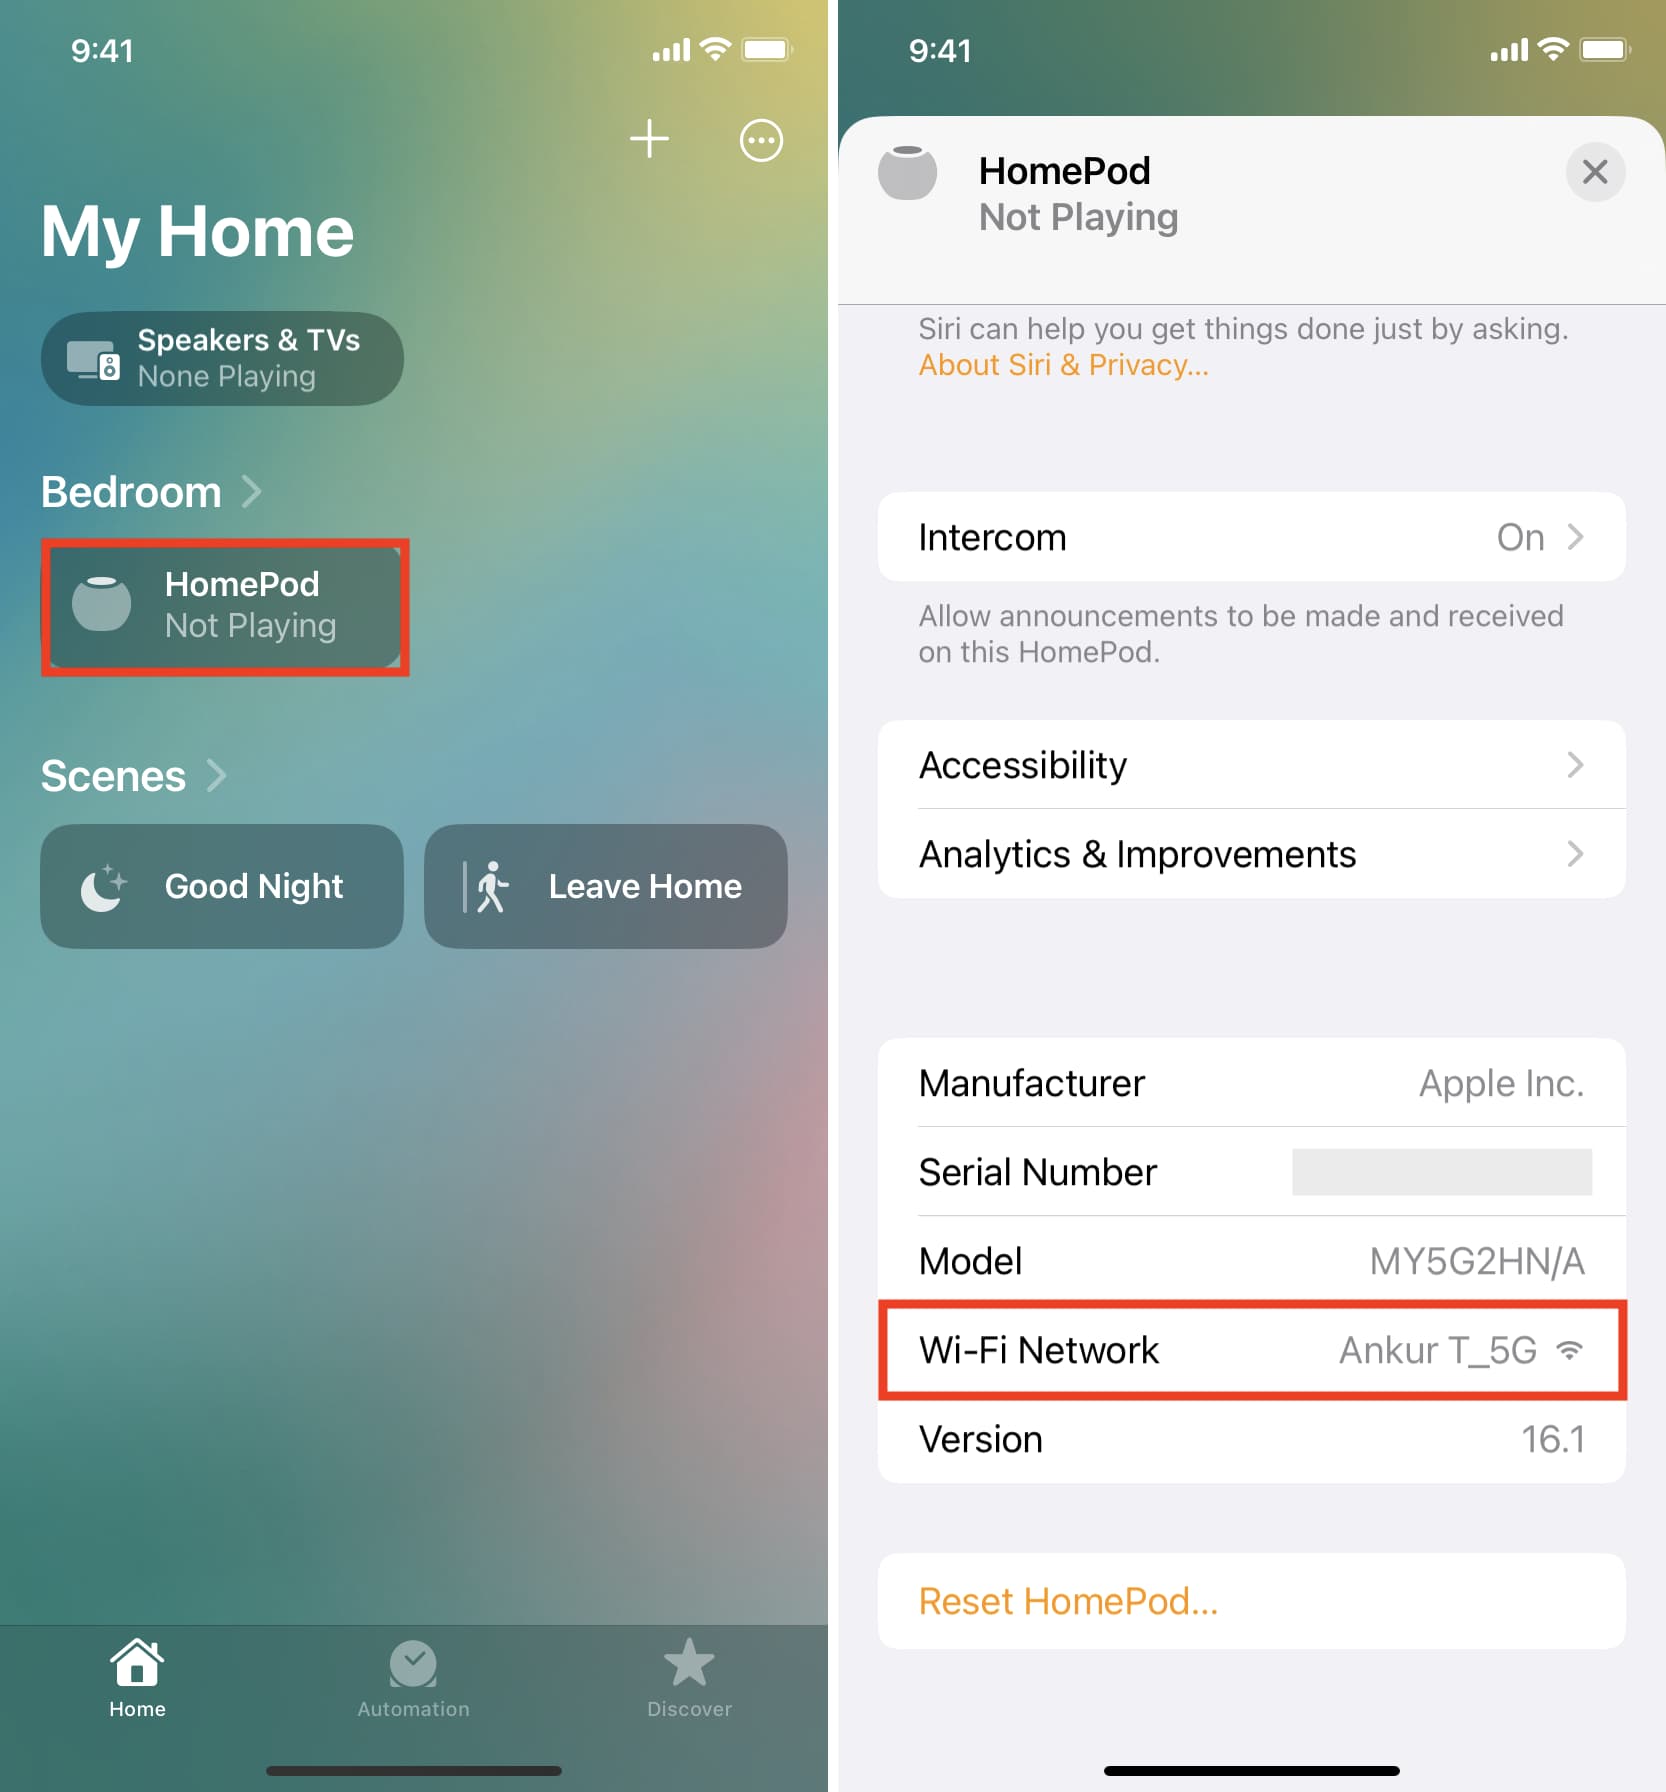 See the Wi-Fi Network your HomePod is connected to